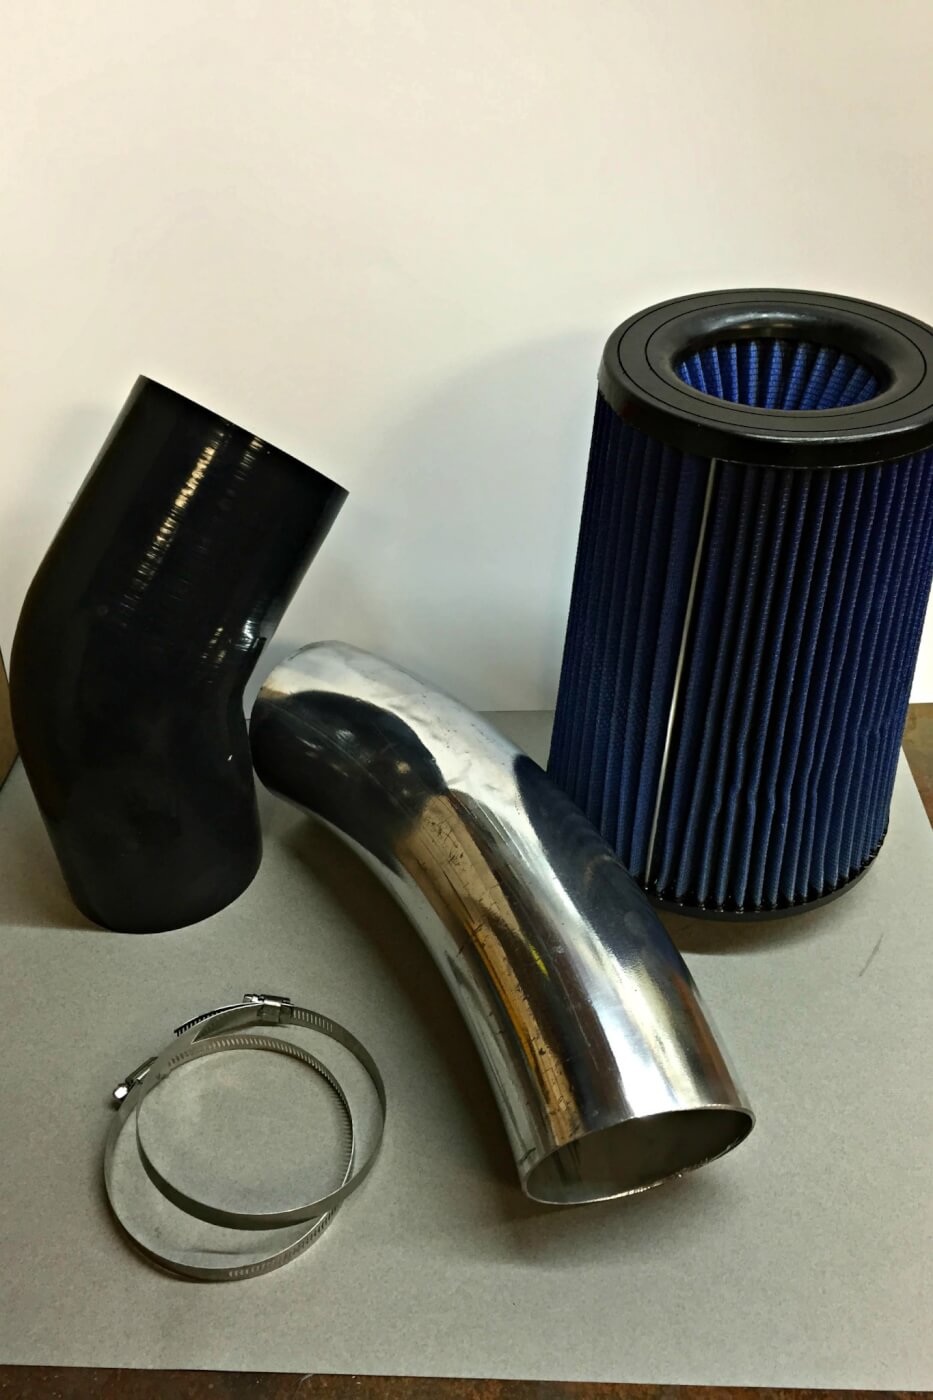 7. While it may not look like much, the AP intake system is all that is really needed to get as much air into the engines possible. The big five-layer air filter is serviceable, so there will no longer be need to throw it away when dirty. Simple rinse it out, let it dry, and reinstall.